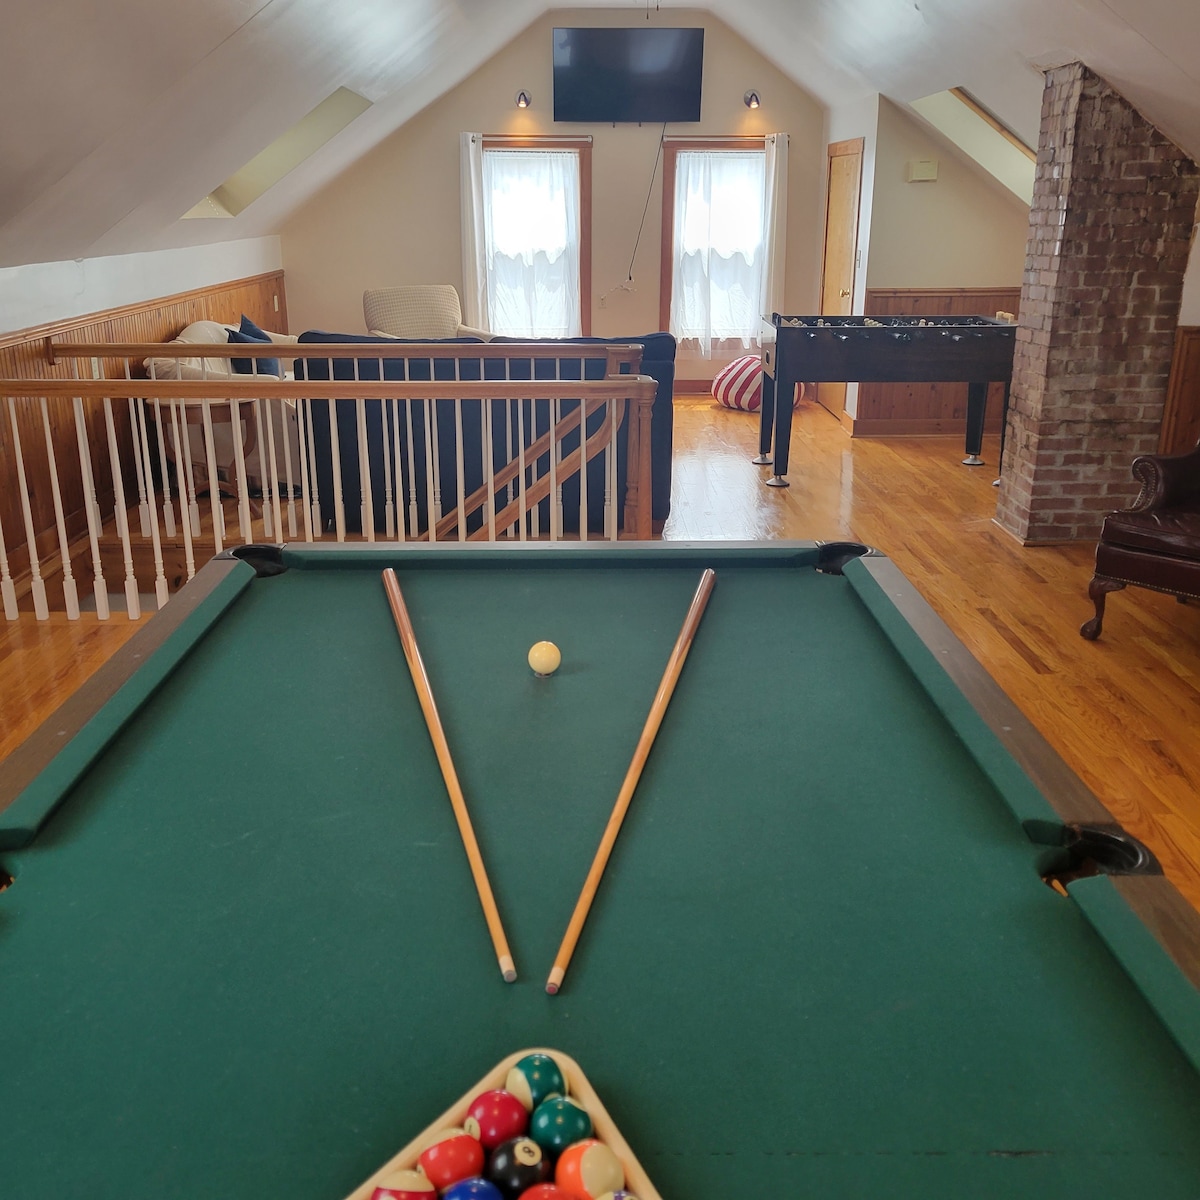 By The Sea - Large Home with Game Room